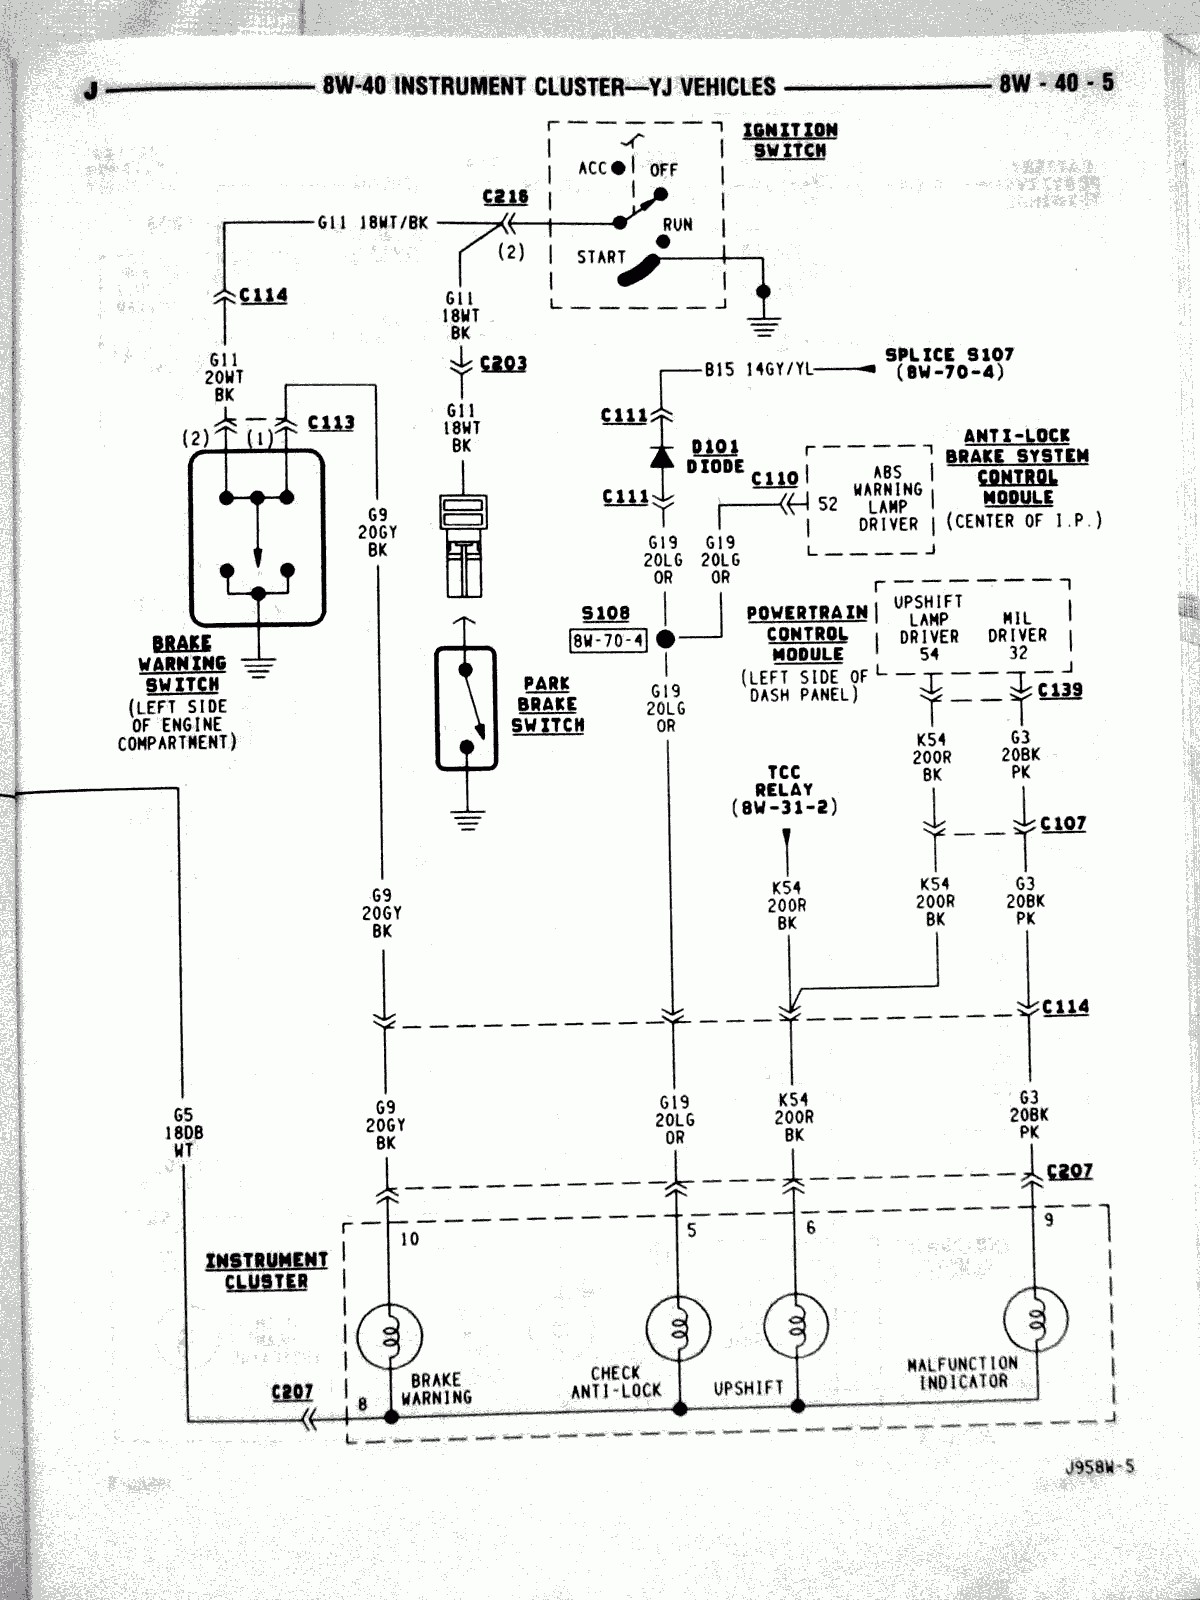 Willys Jeep Wiring Diagram Great 91 Jeep Wrangler Wiring Diagram Jeep Pinterest Of Willys Jeep Wiring Diagram